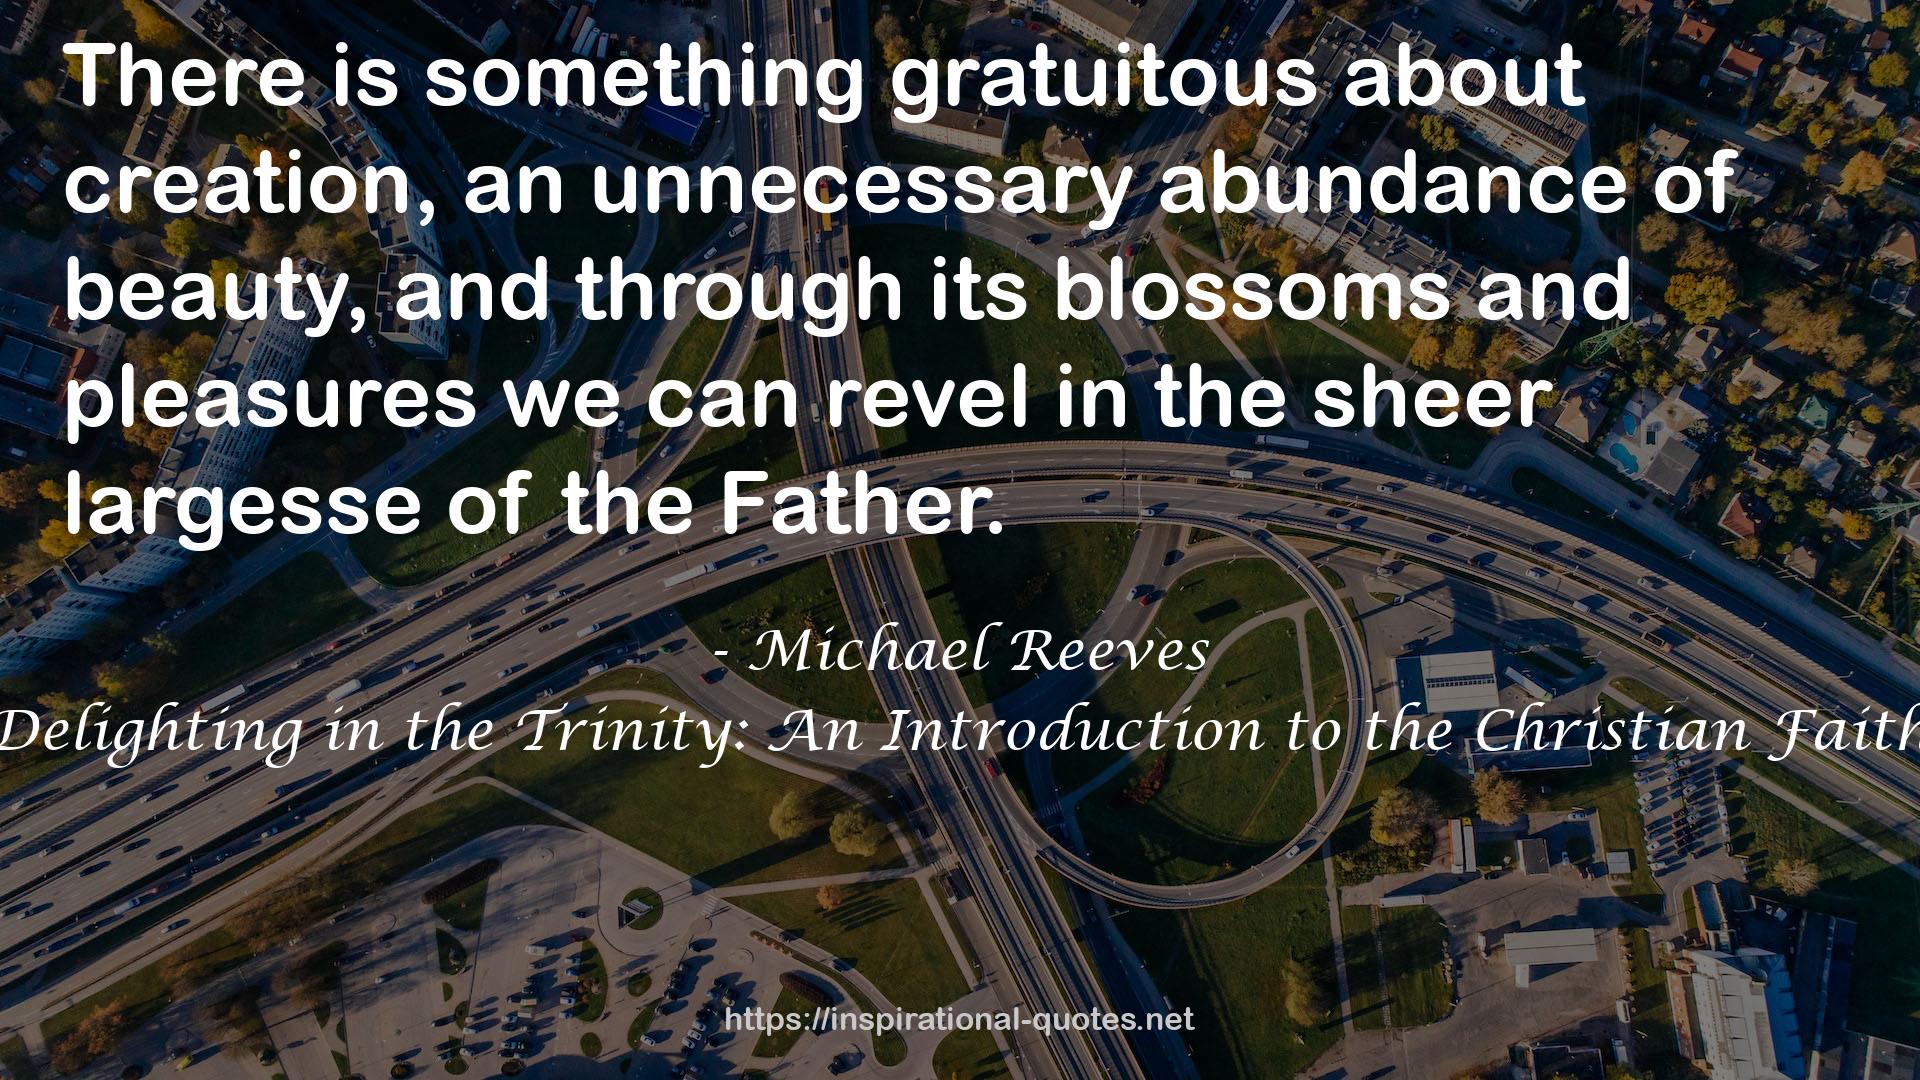 Michael Reeves QUOTES